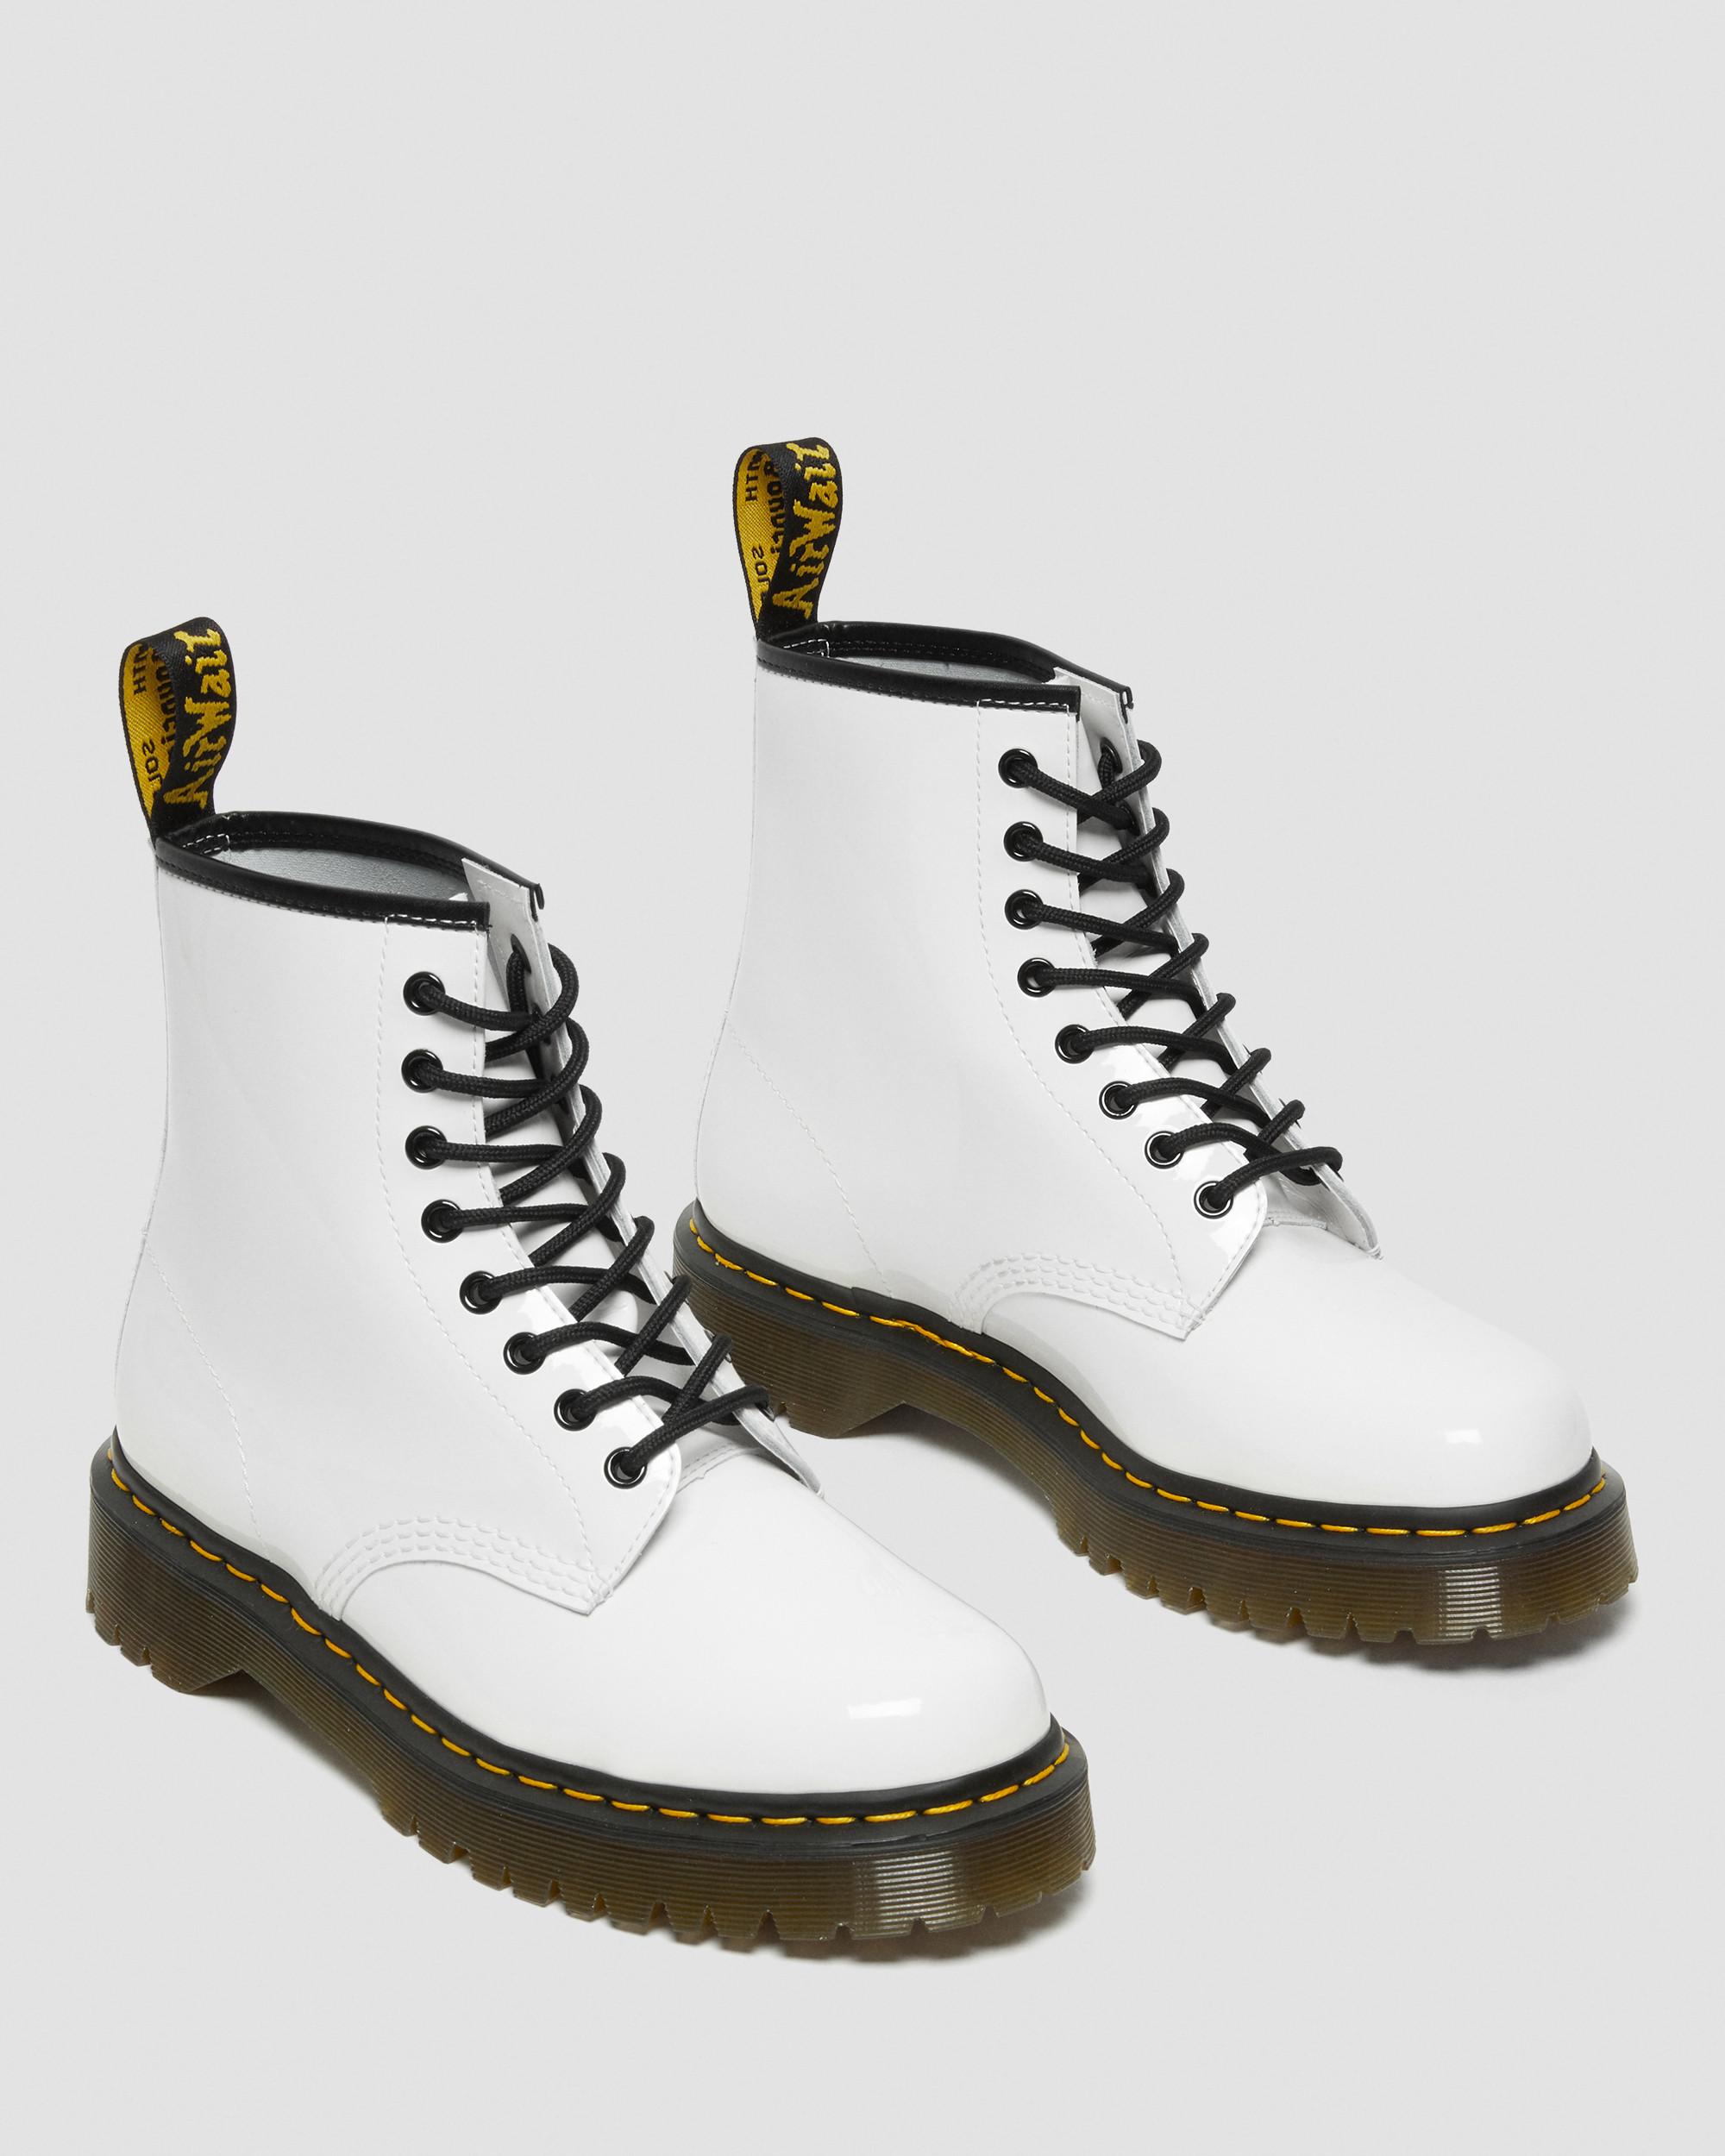 1460 Bex Patent Leather Lace Up Boots1460 Bex Patent Leather Lace Up Boots Dr. Martens